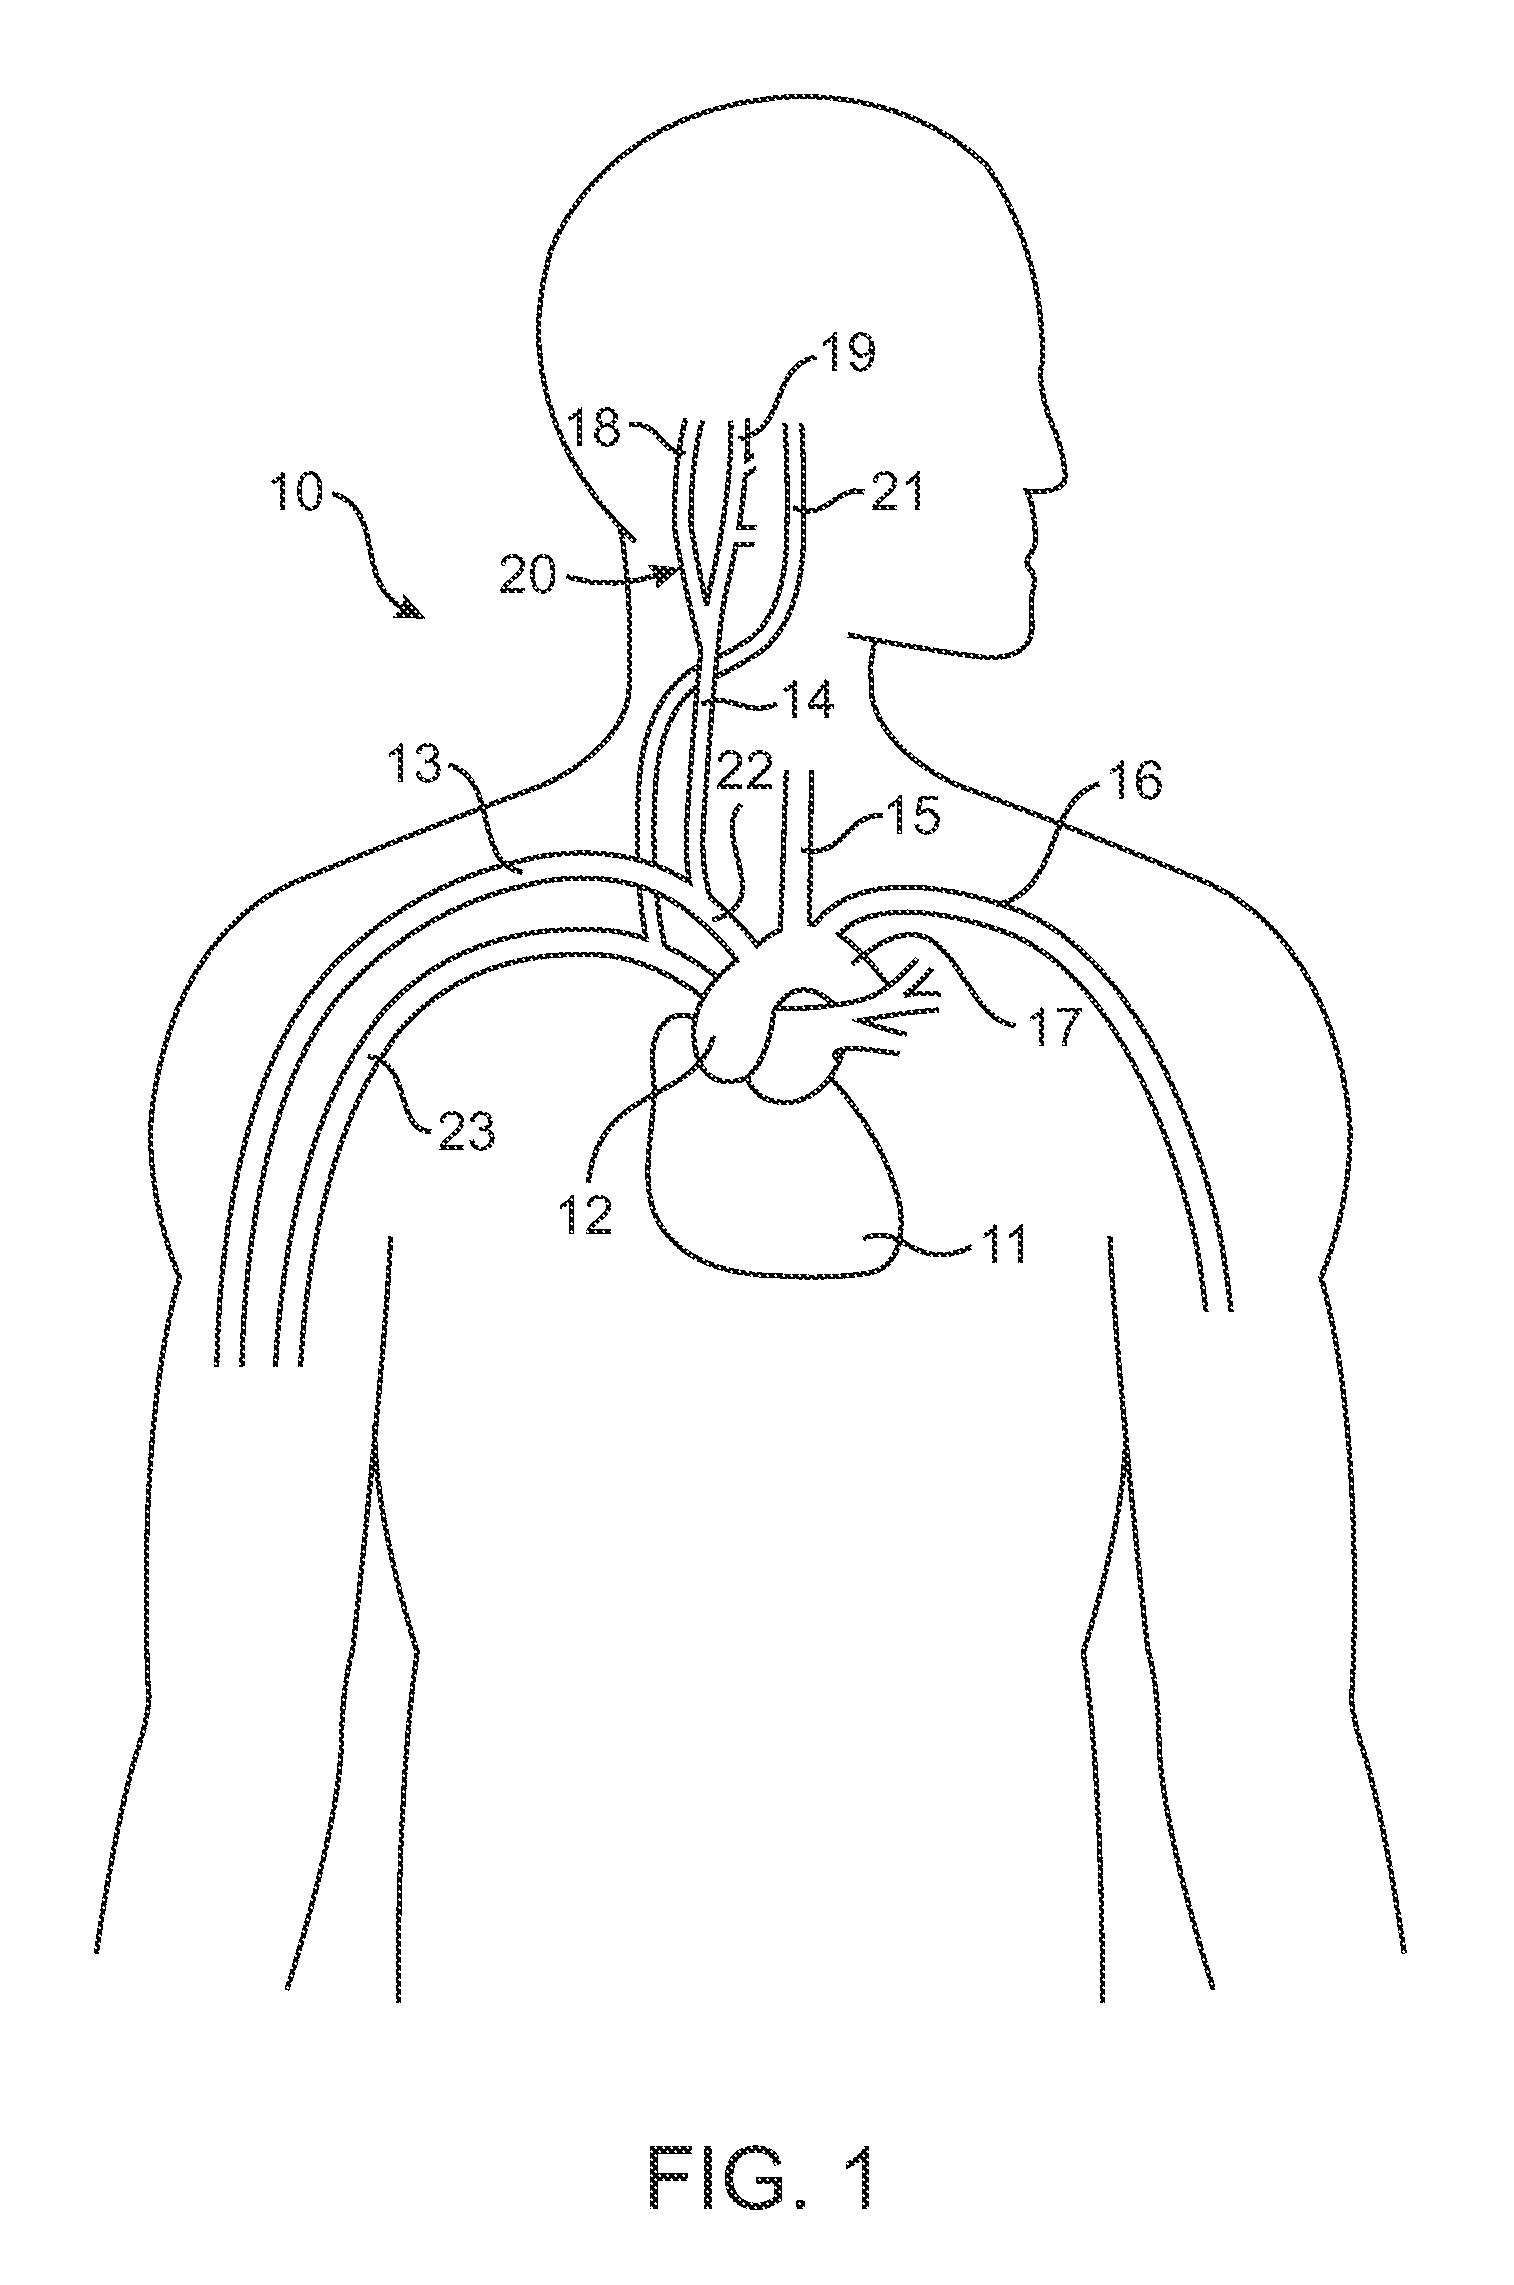 Electrode array structures and methods of use for cardiovascular reflex control